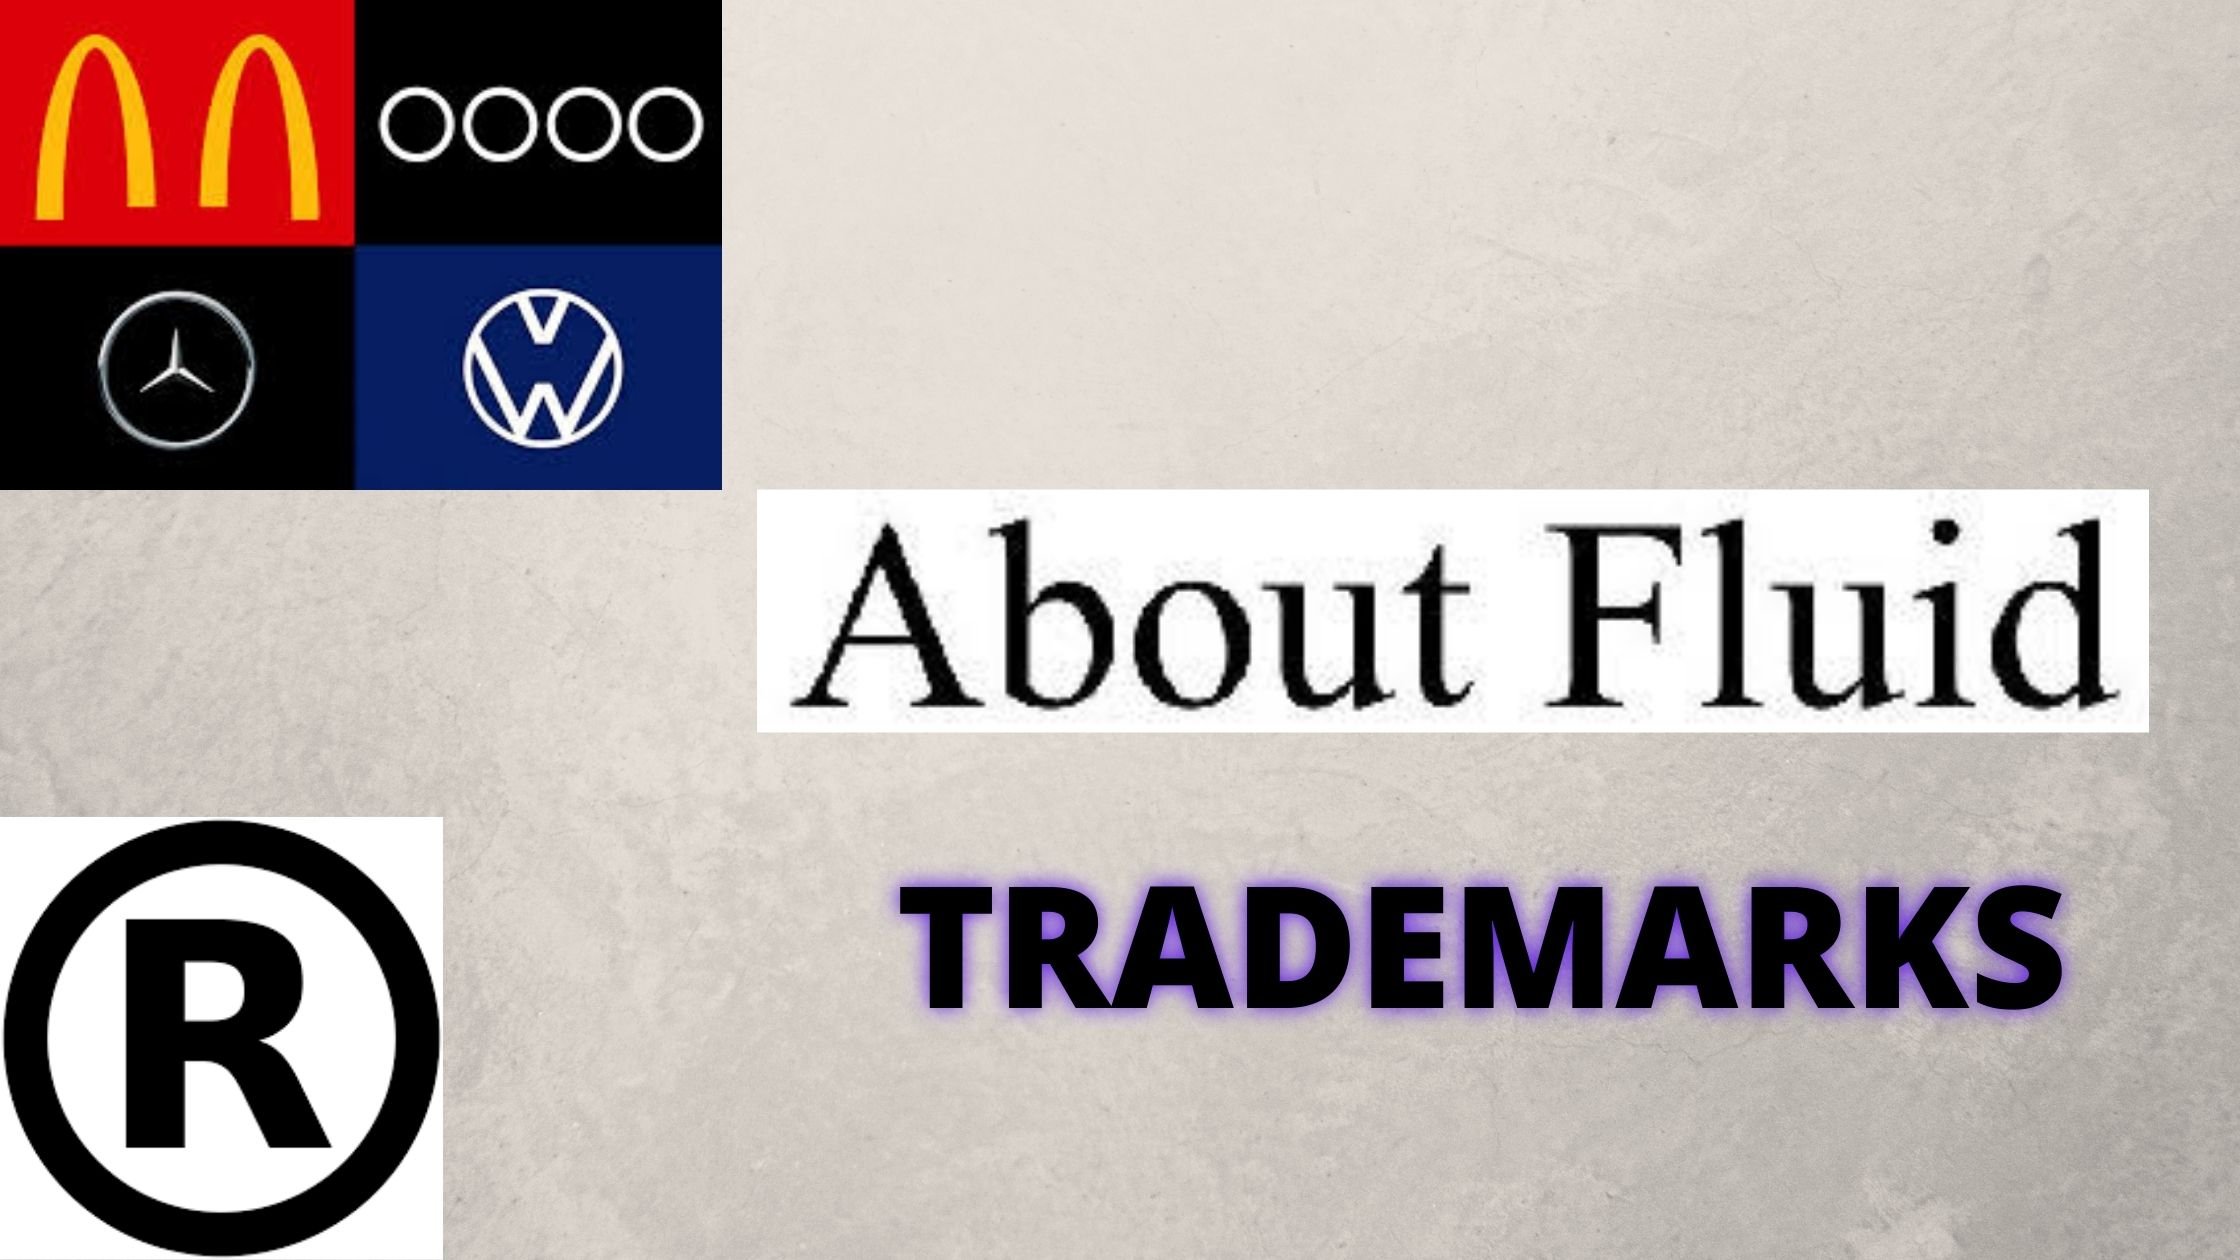 All About Fluid Trademarks